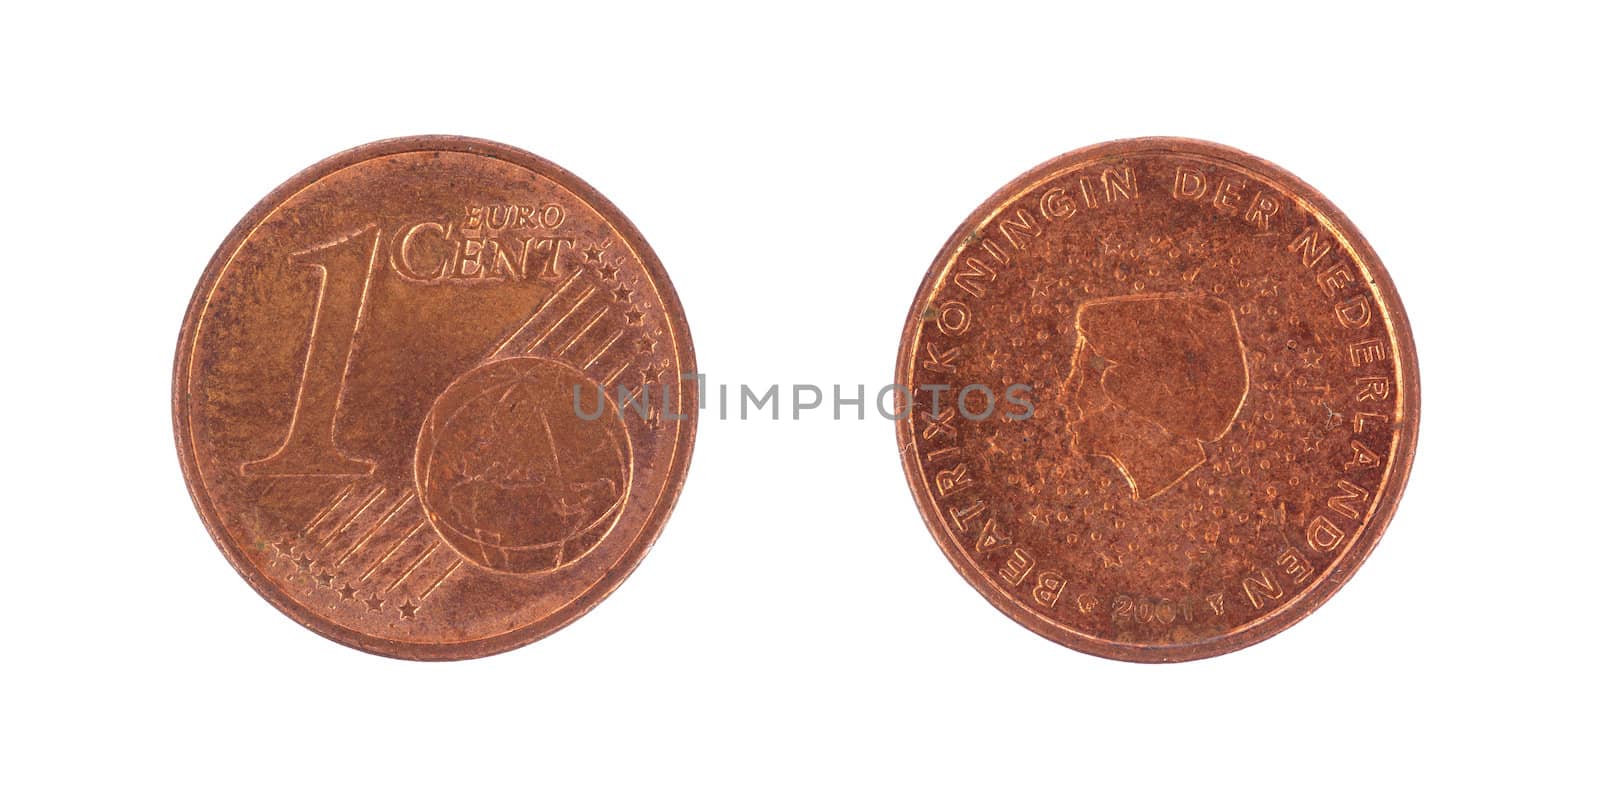 One euro cents coin by michaklootwijk